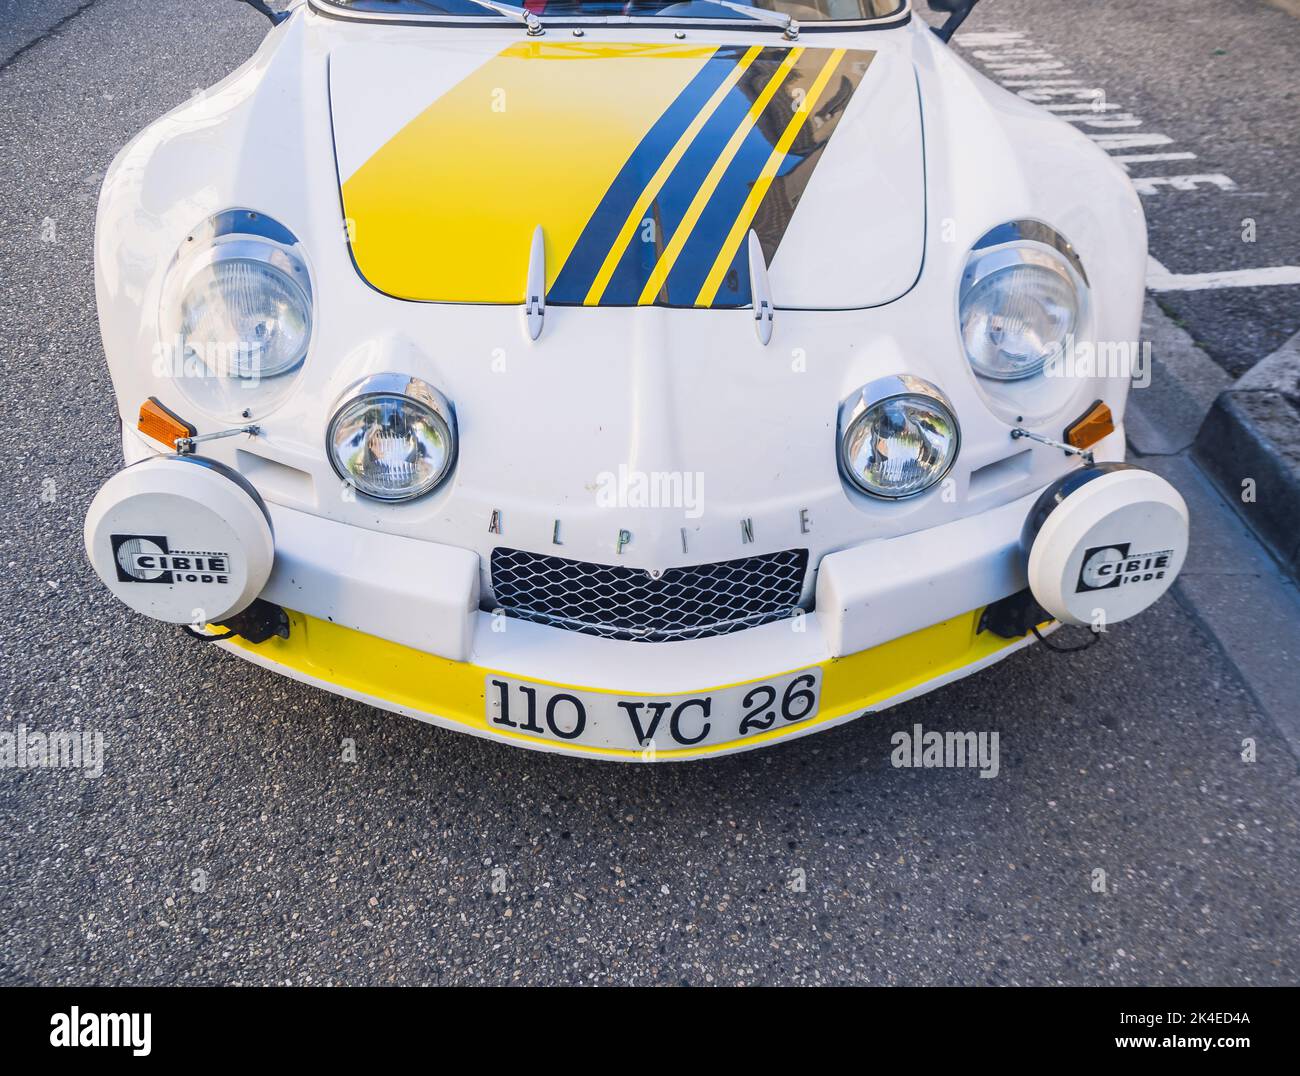 Loriol sur Drome, France - 17 September, 2022: Vintage renault alpine berlinette 1300. Old white and yellow racing car parked on the street Stock Photo